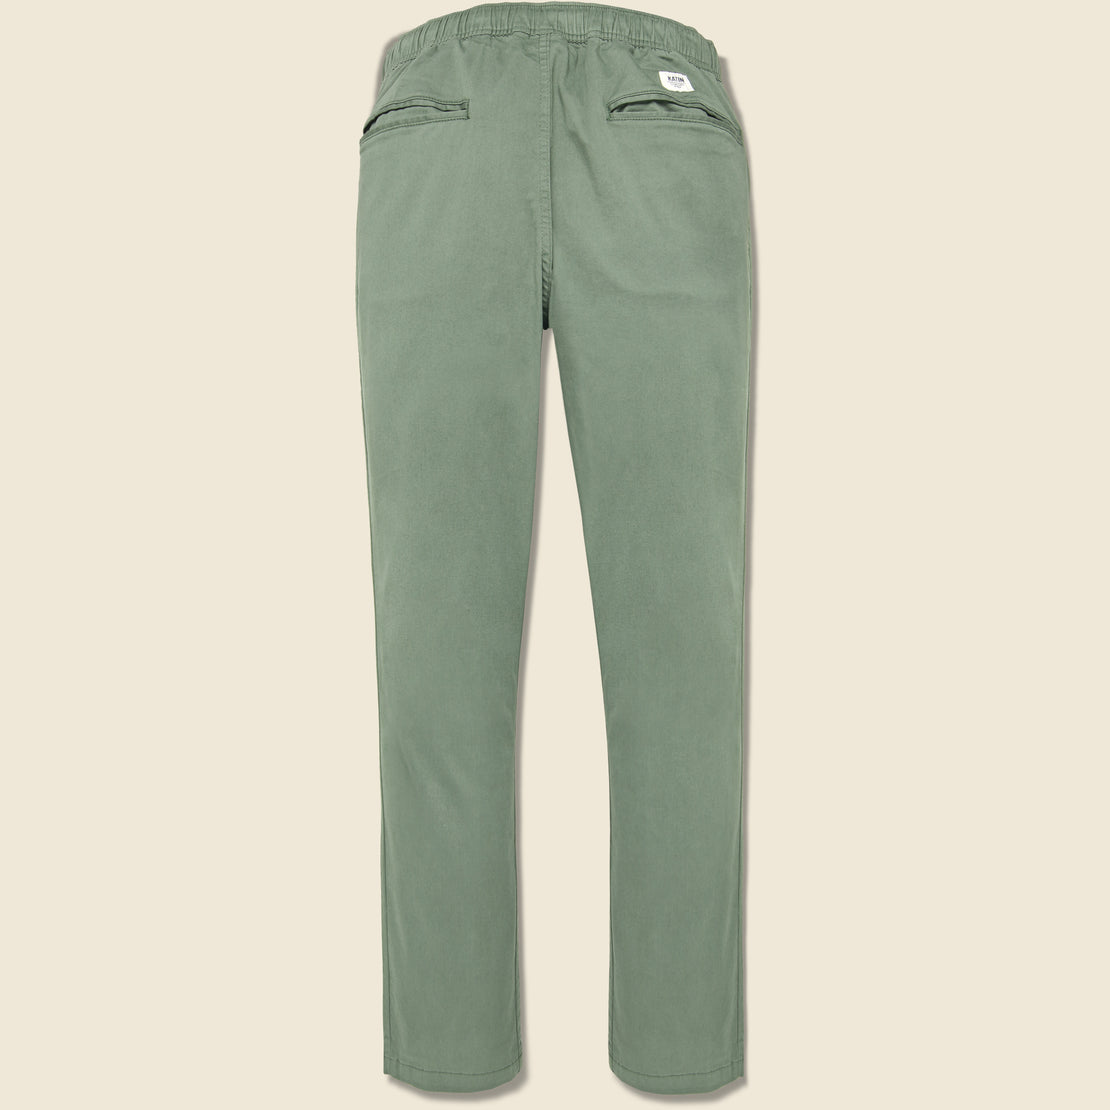 Stand Easy Pant - Olive - Katin - STAG Provisions - Pants - Twill